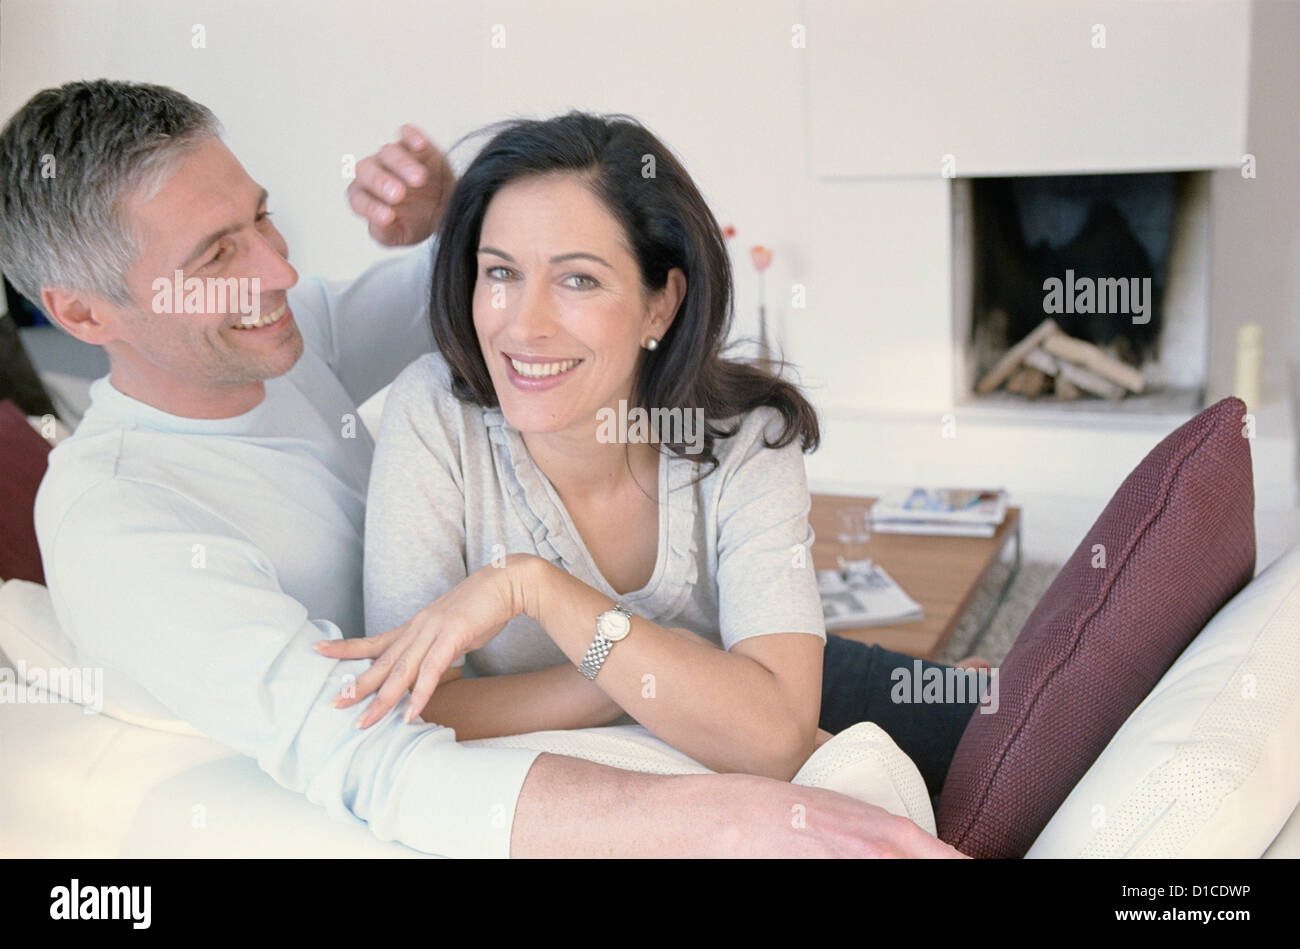 Family relax License free except ads and billboards Stock Photo